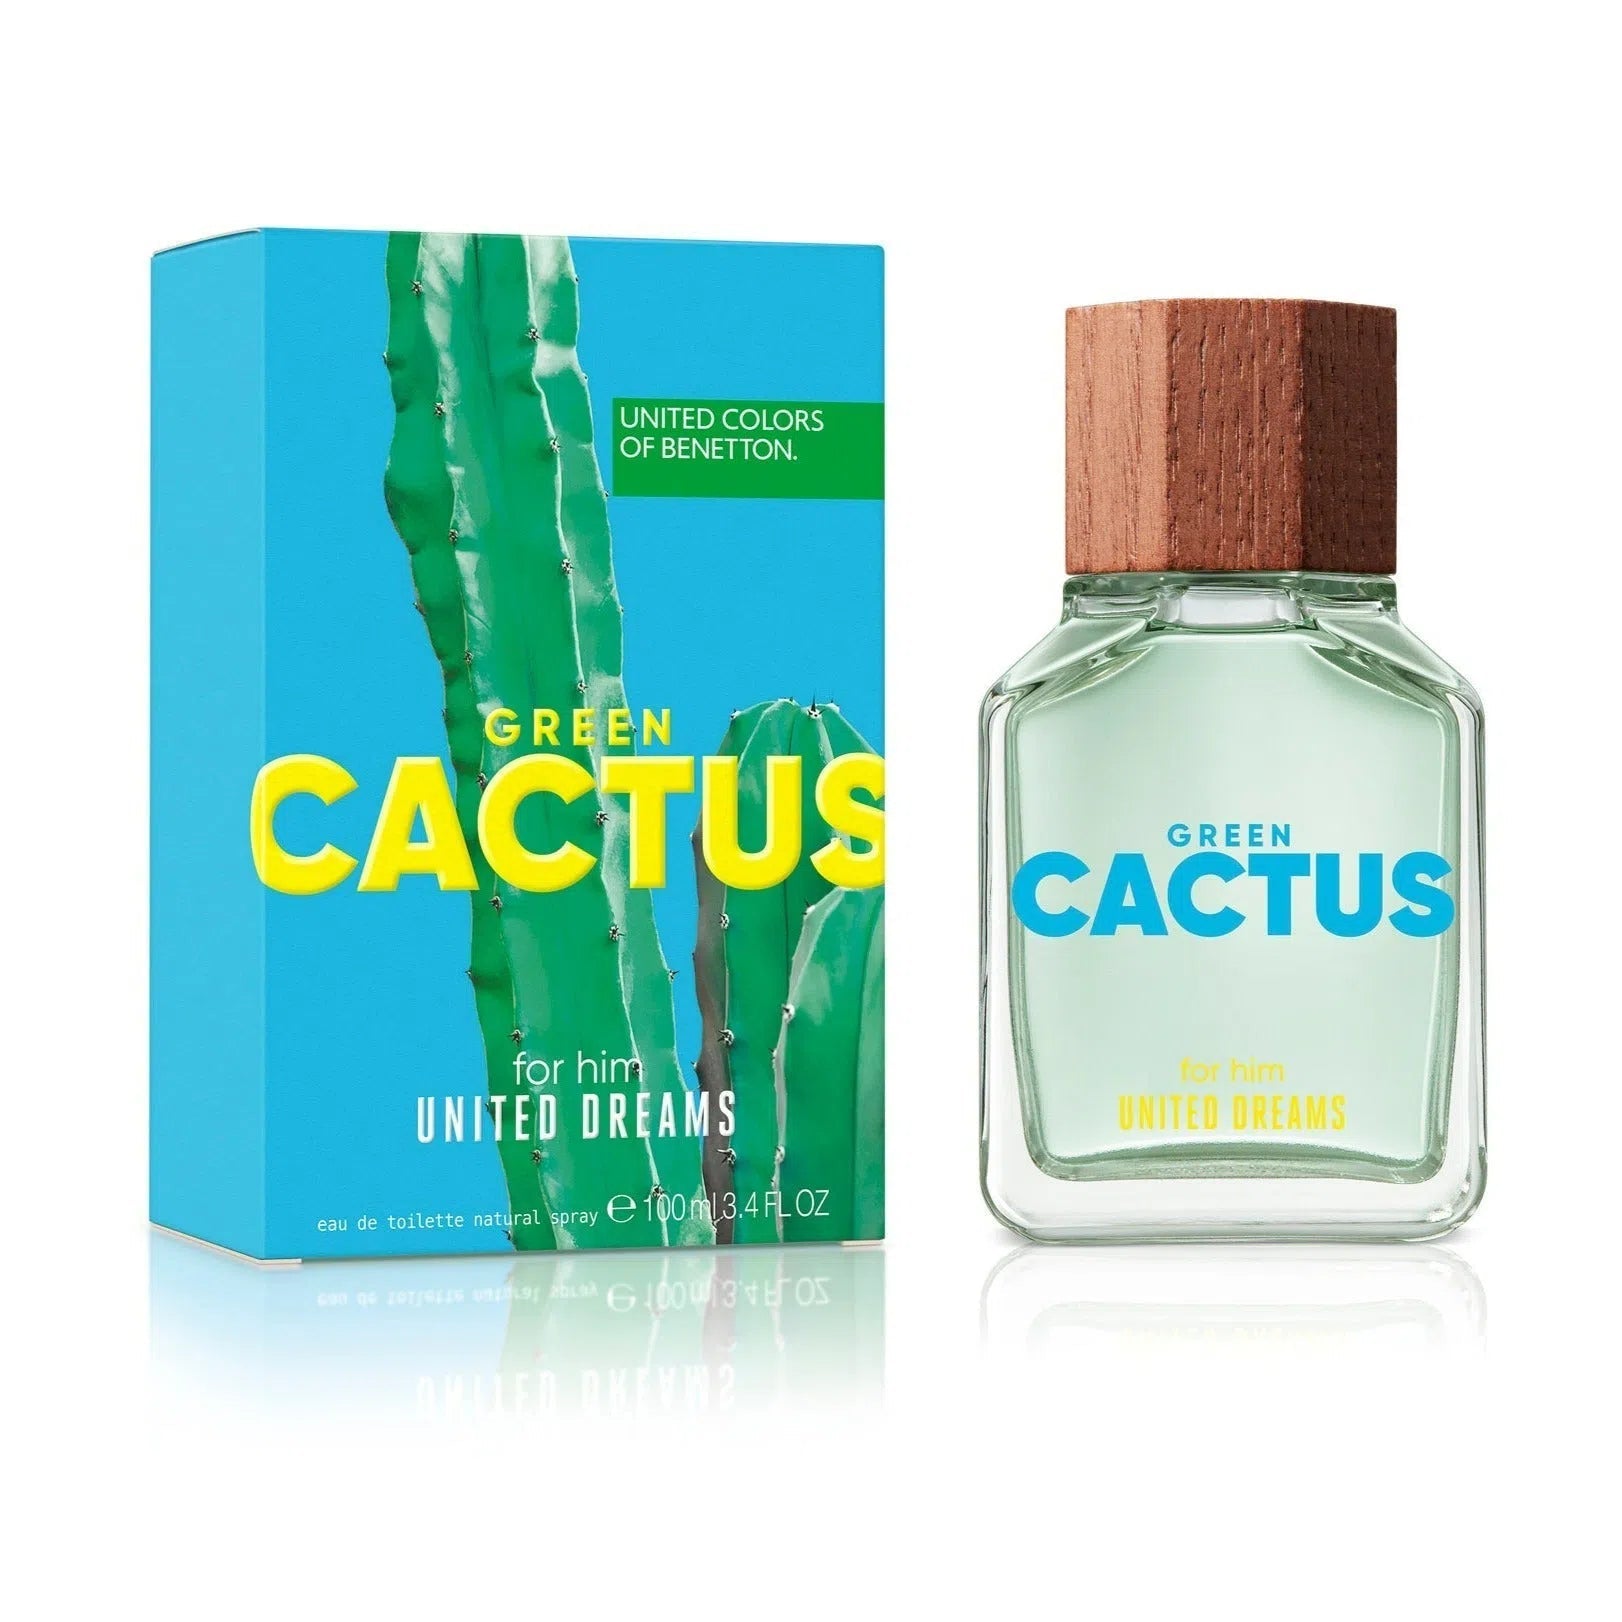 Perfume United Colors of Benetton Green Cactus For Him EDT (M) / 100 ml - 8433982024078- 1 - Prive Perfumes Honduras